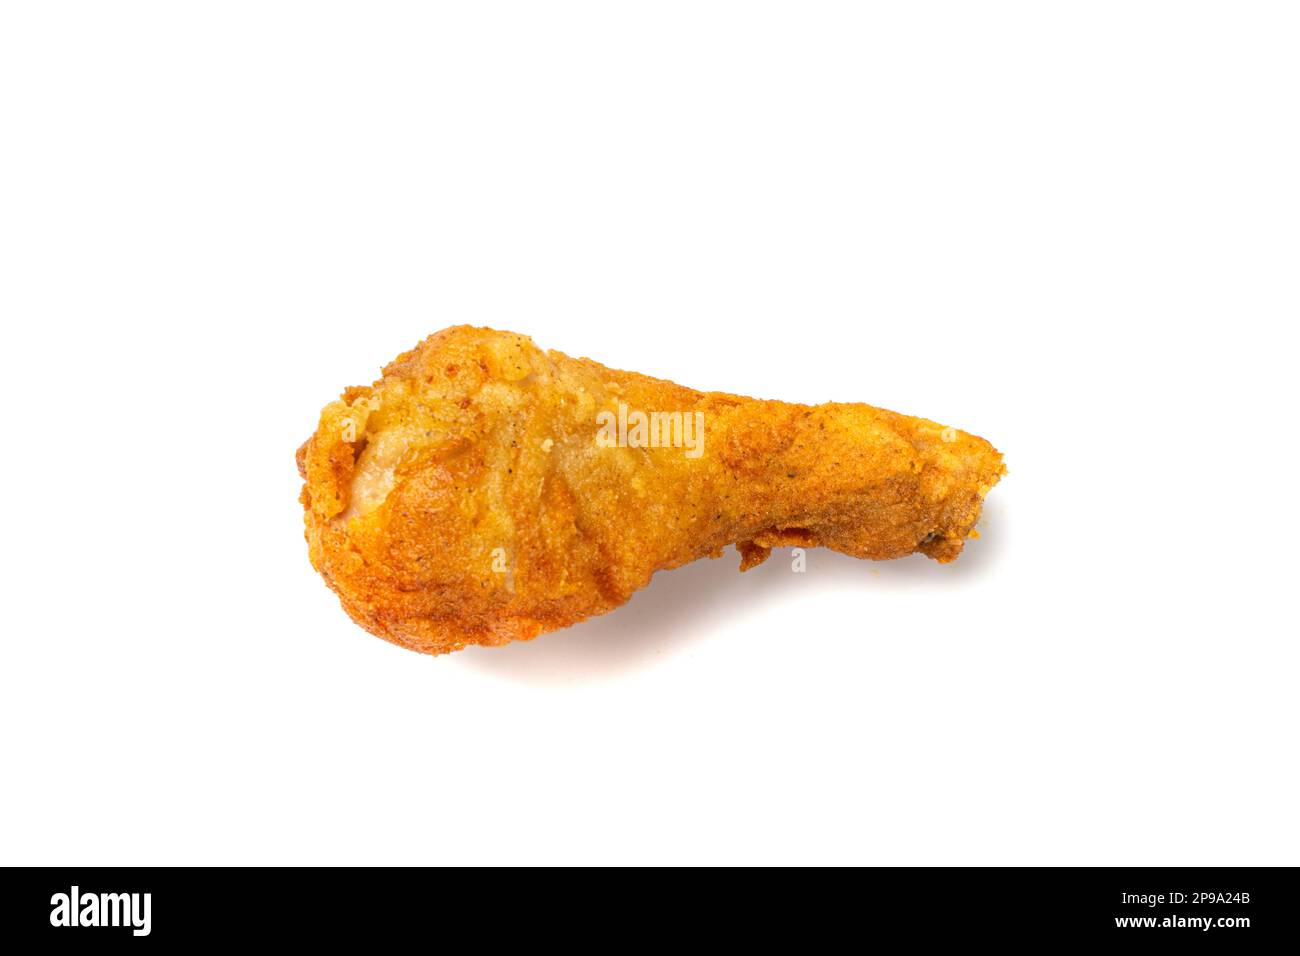 Chicken Legs Isolated, Fry Breaded Drumstick, Deep Fried Chicken Drumsticks on White Background Stock Photo